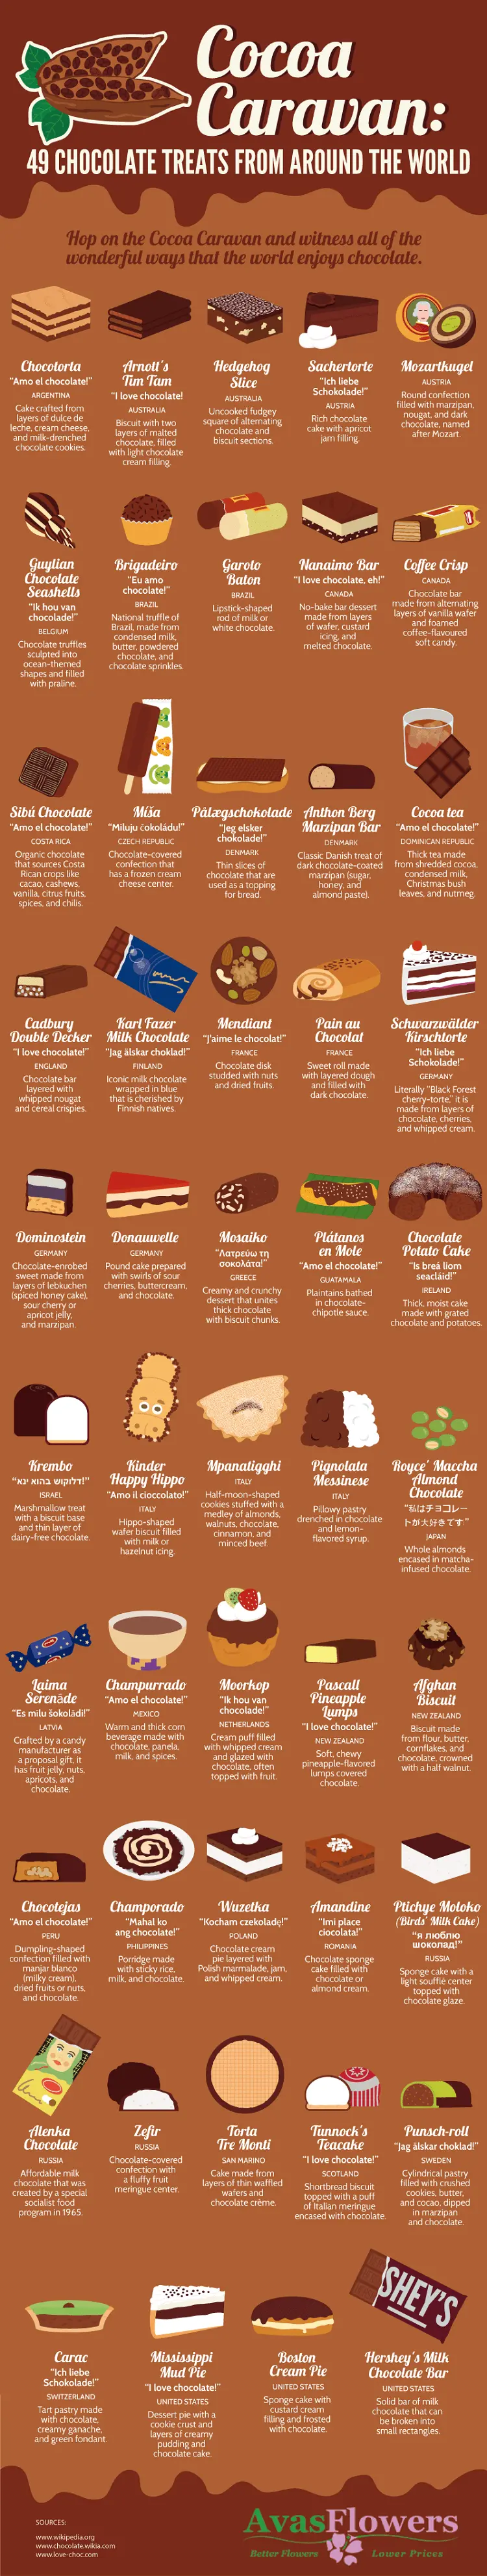 http://www.awesomeinventions.com/wp-content/uploads/2015/10/49-Chocolate-Treats.png